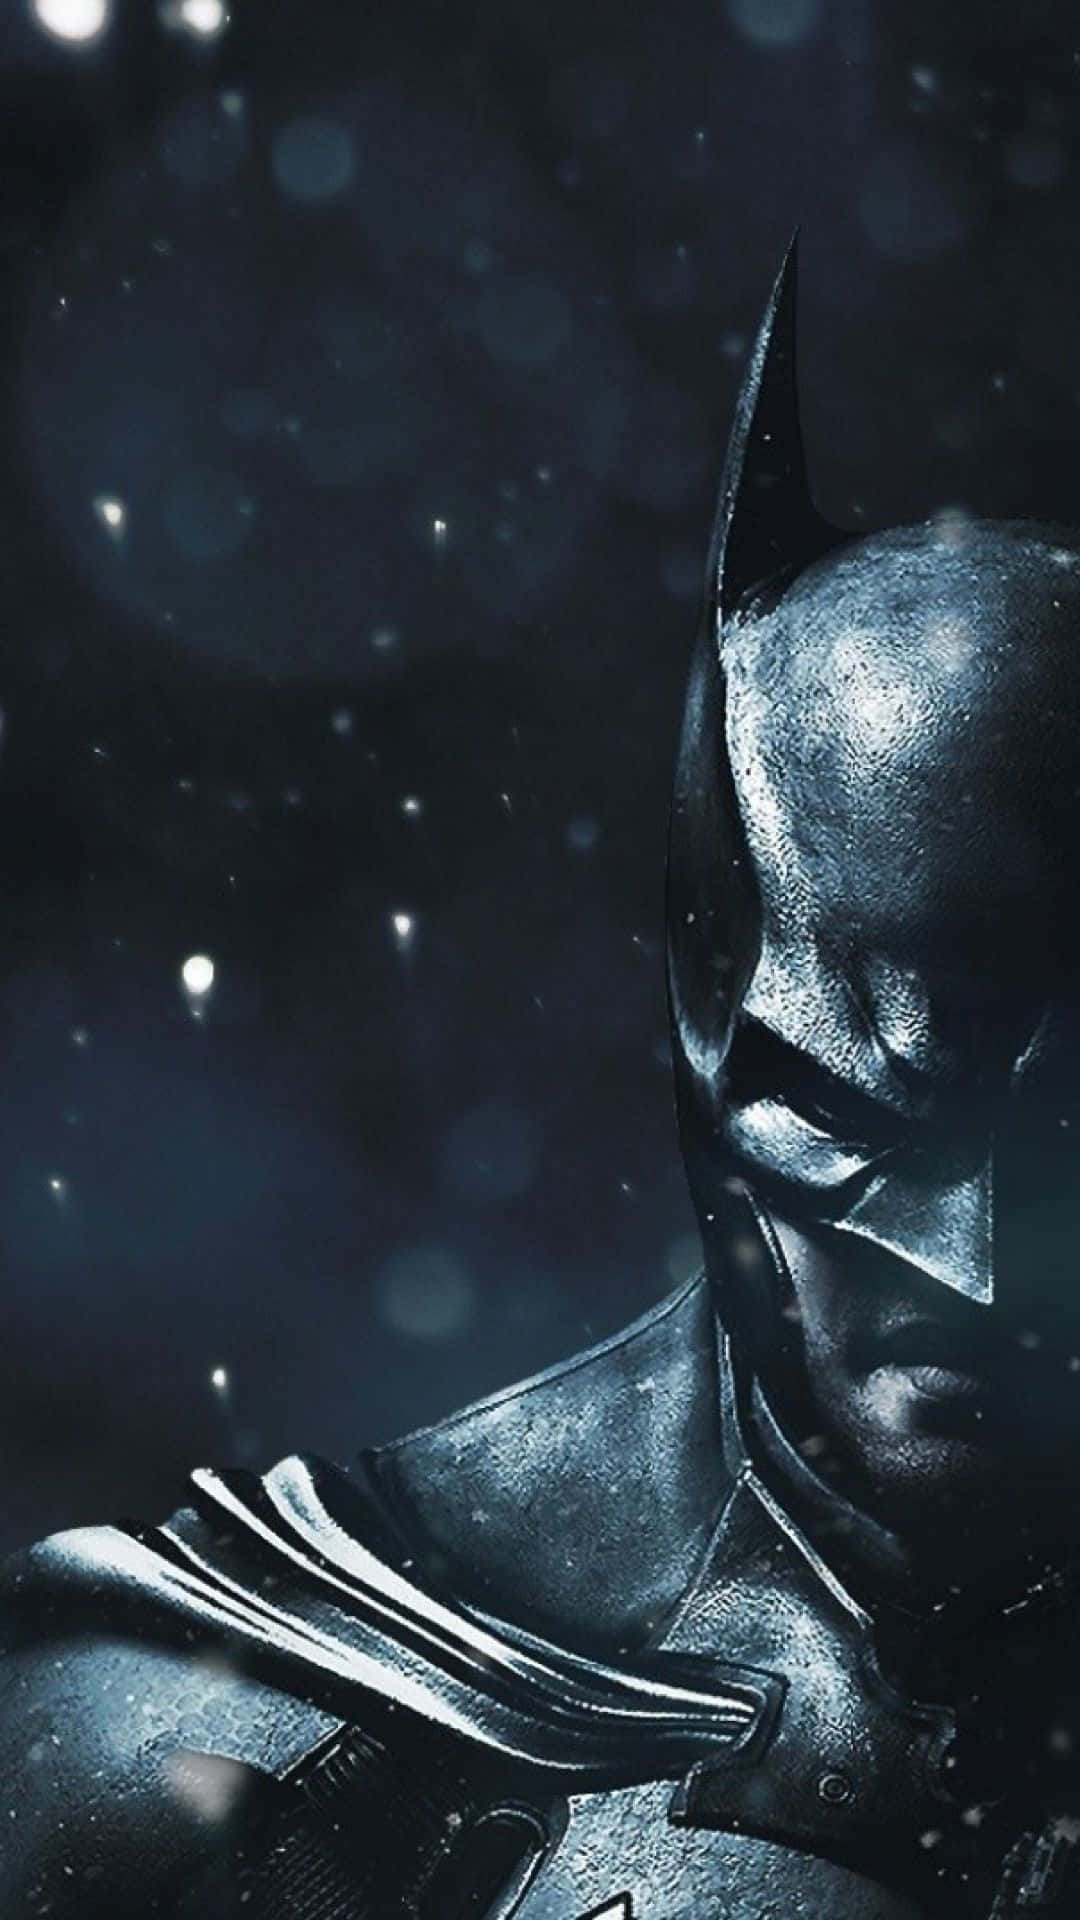 Get the coolest look for your iPhone - with the "Awesome Batman" design Wallpaper